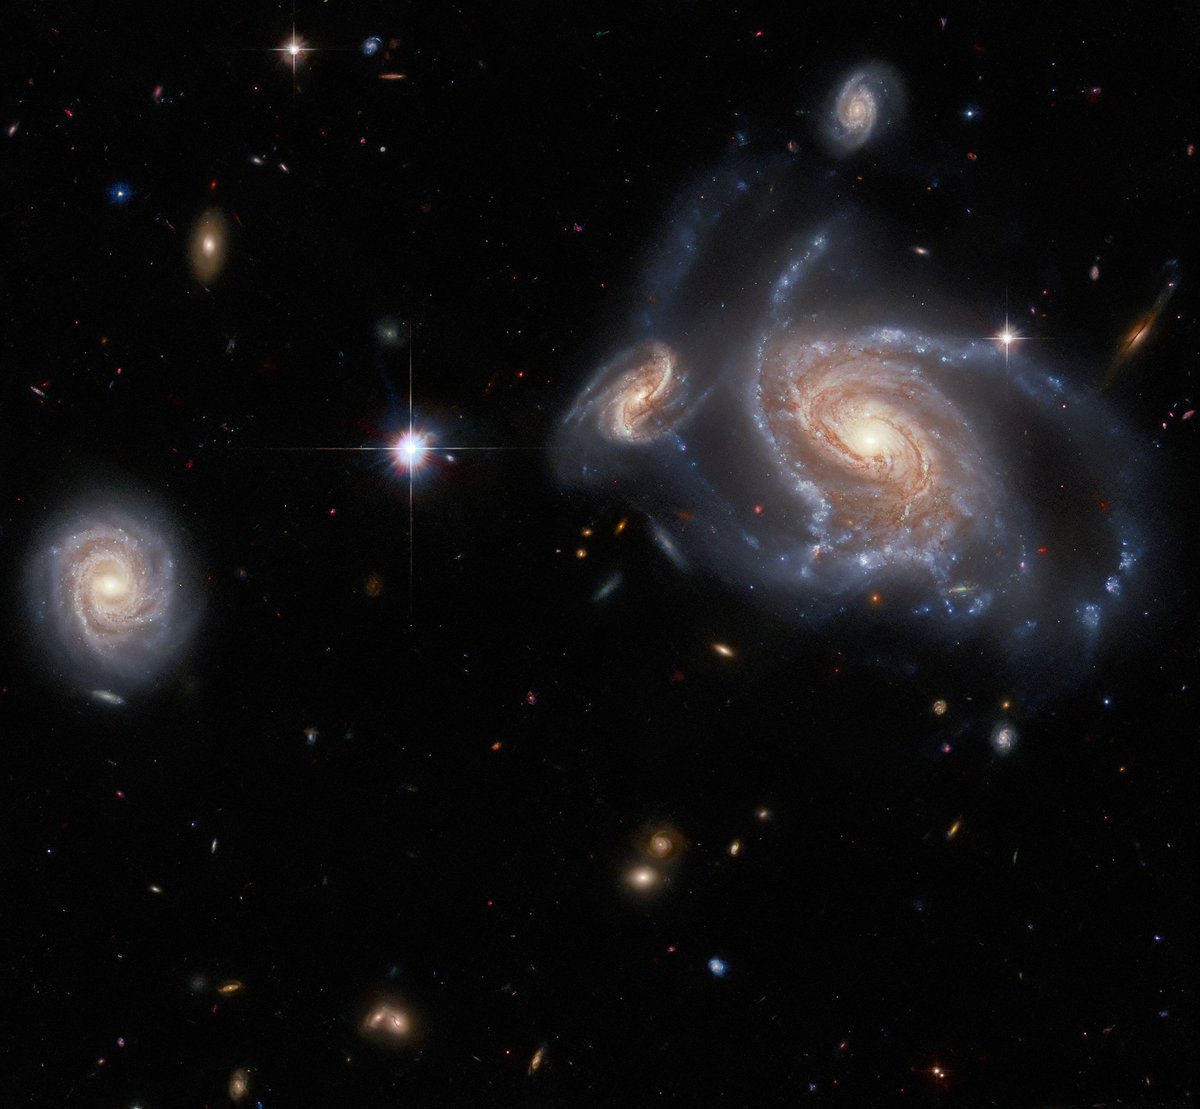 It's all about perspective.

The gorgeous galaxies in this #HubbleFriday view might appear to be close to one another from our view.

However, in reality the two side-by-side galaxies on the right side of the image are about 300 million light-years apart: go.nasa.gov/48CpVEC